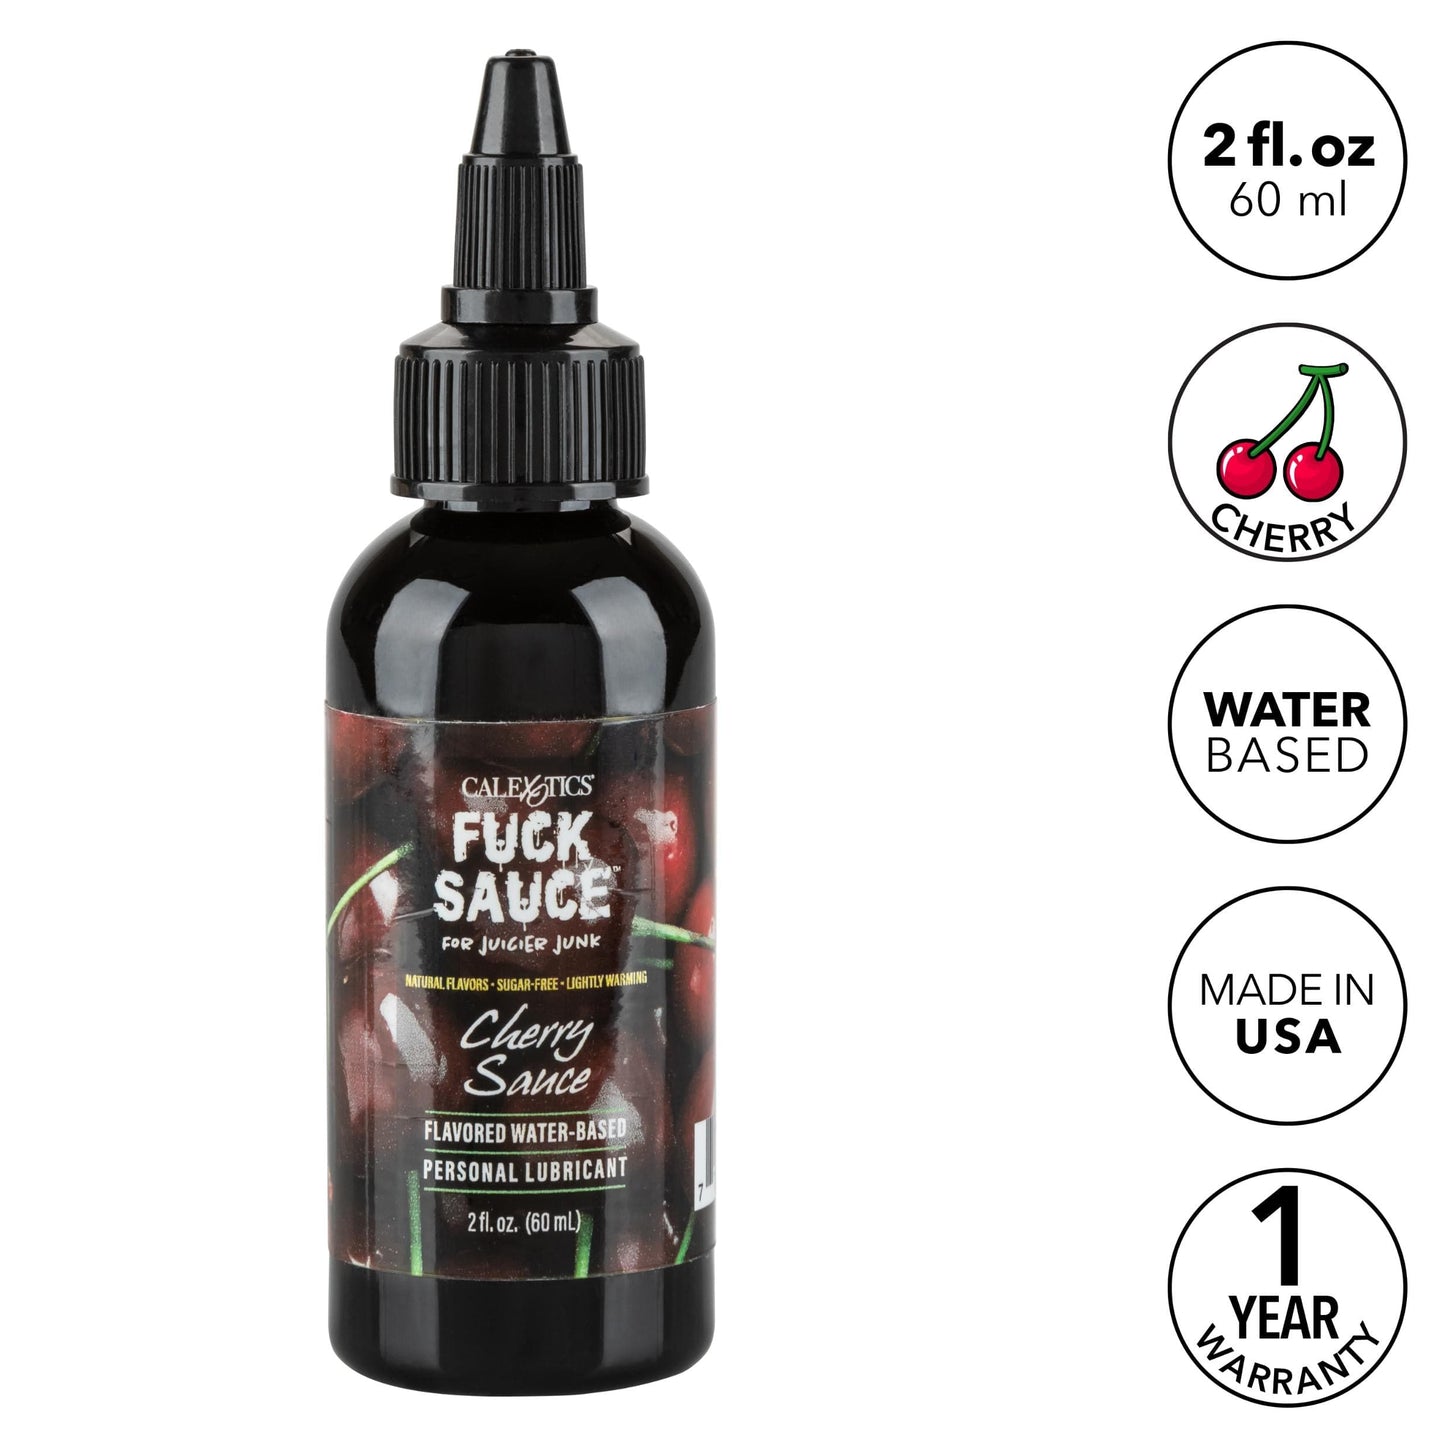 fuck sauce flavored water based personal lubricant cherry 2 fl oz